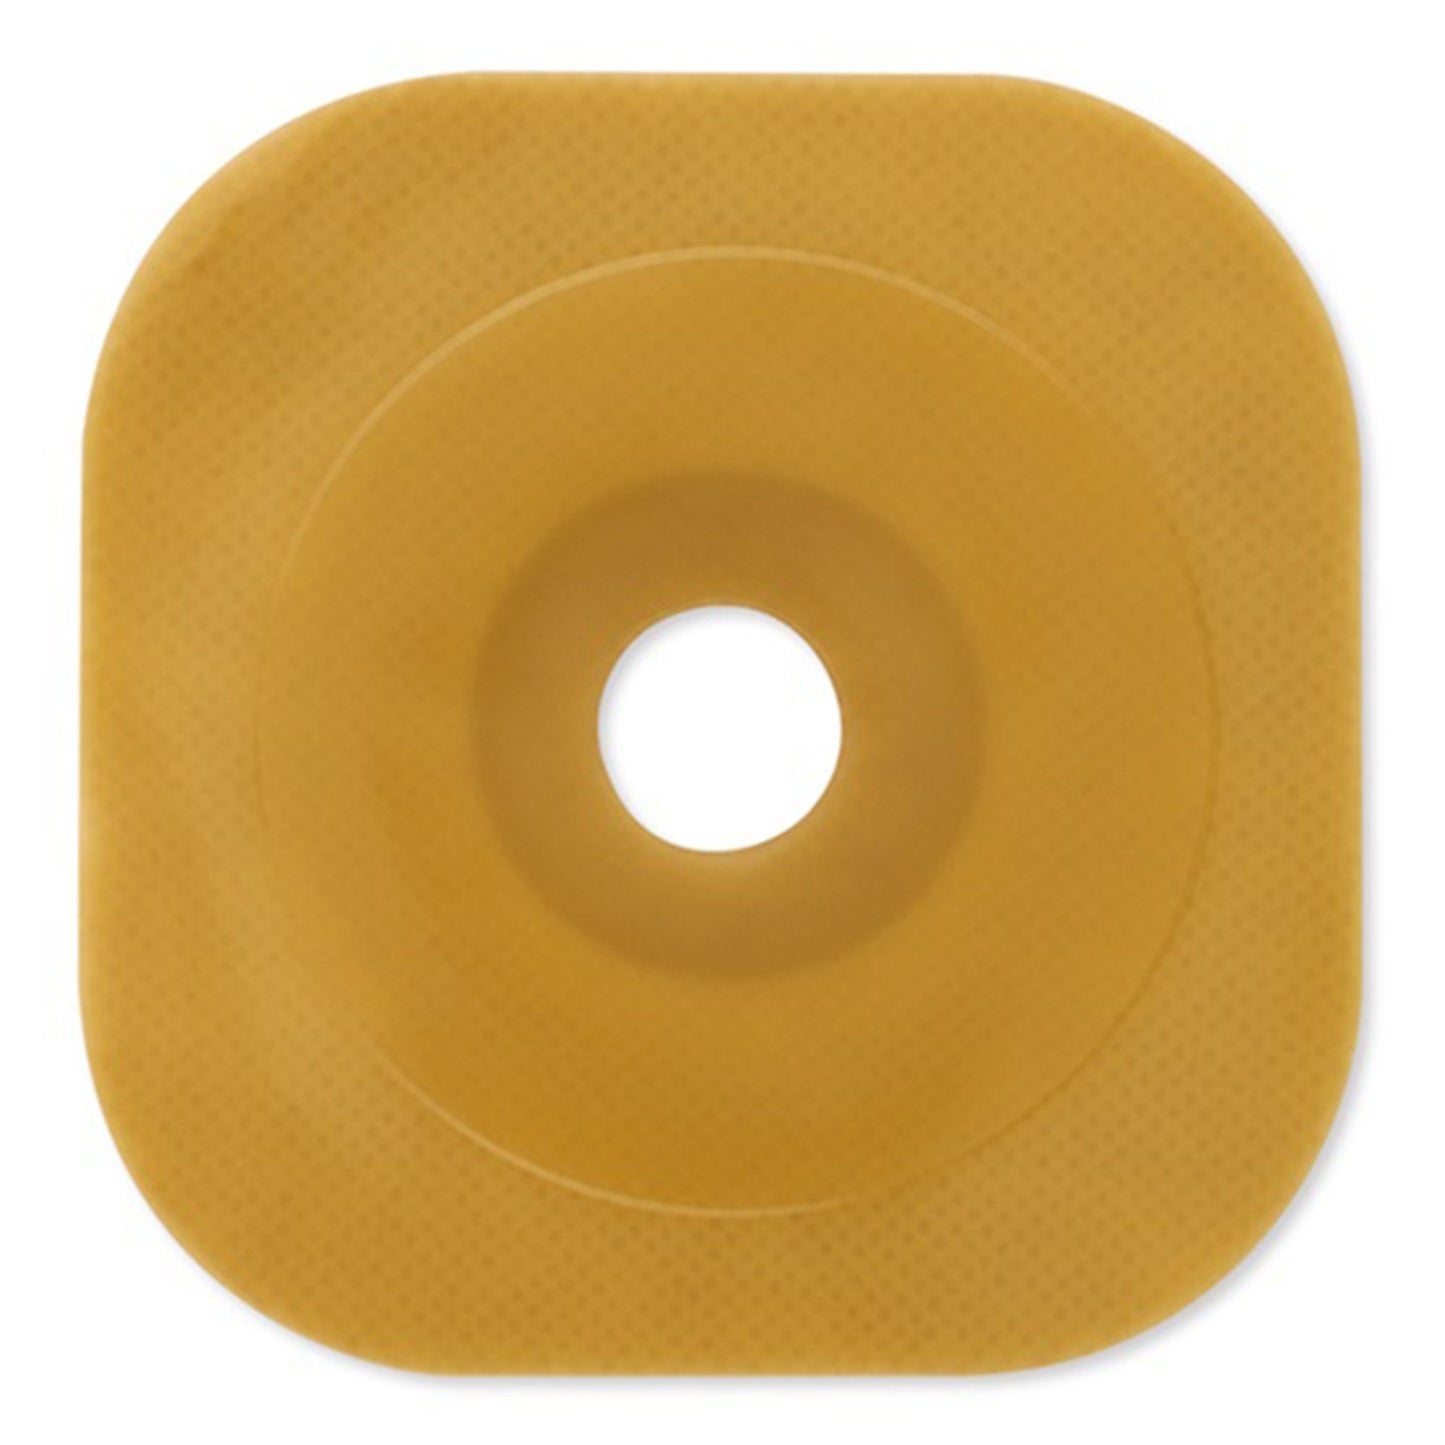 New Image™ FlexWear™ Colostomy Barrier With 1 Inch Stoma Opening, 5 ct